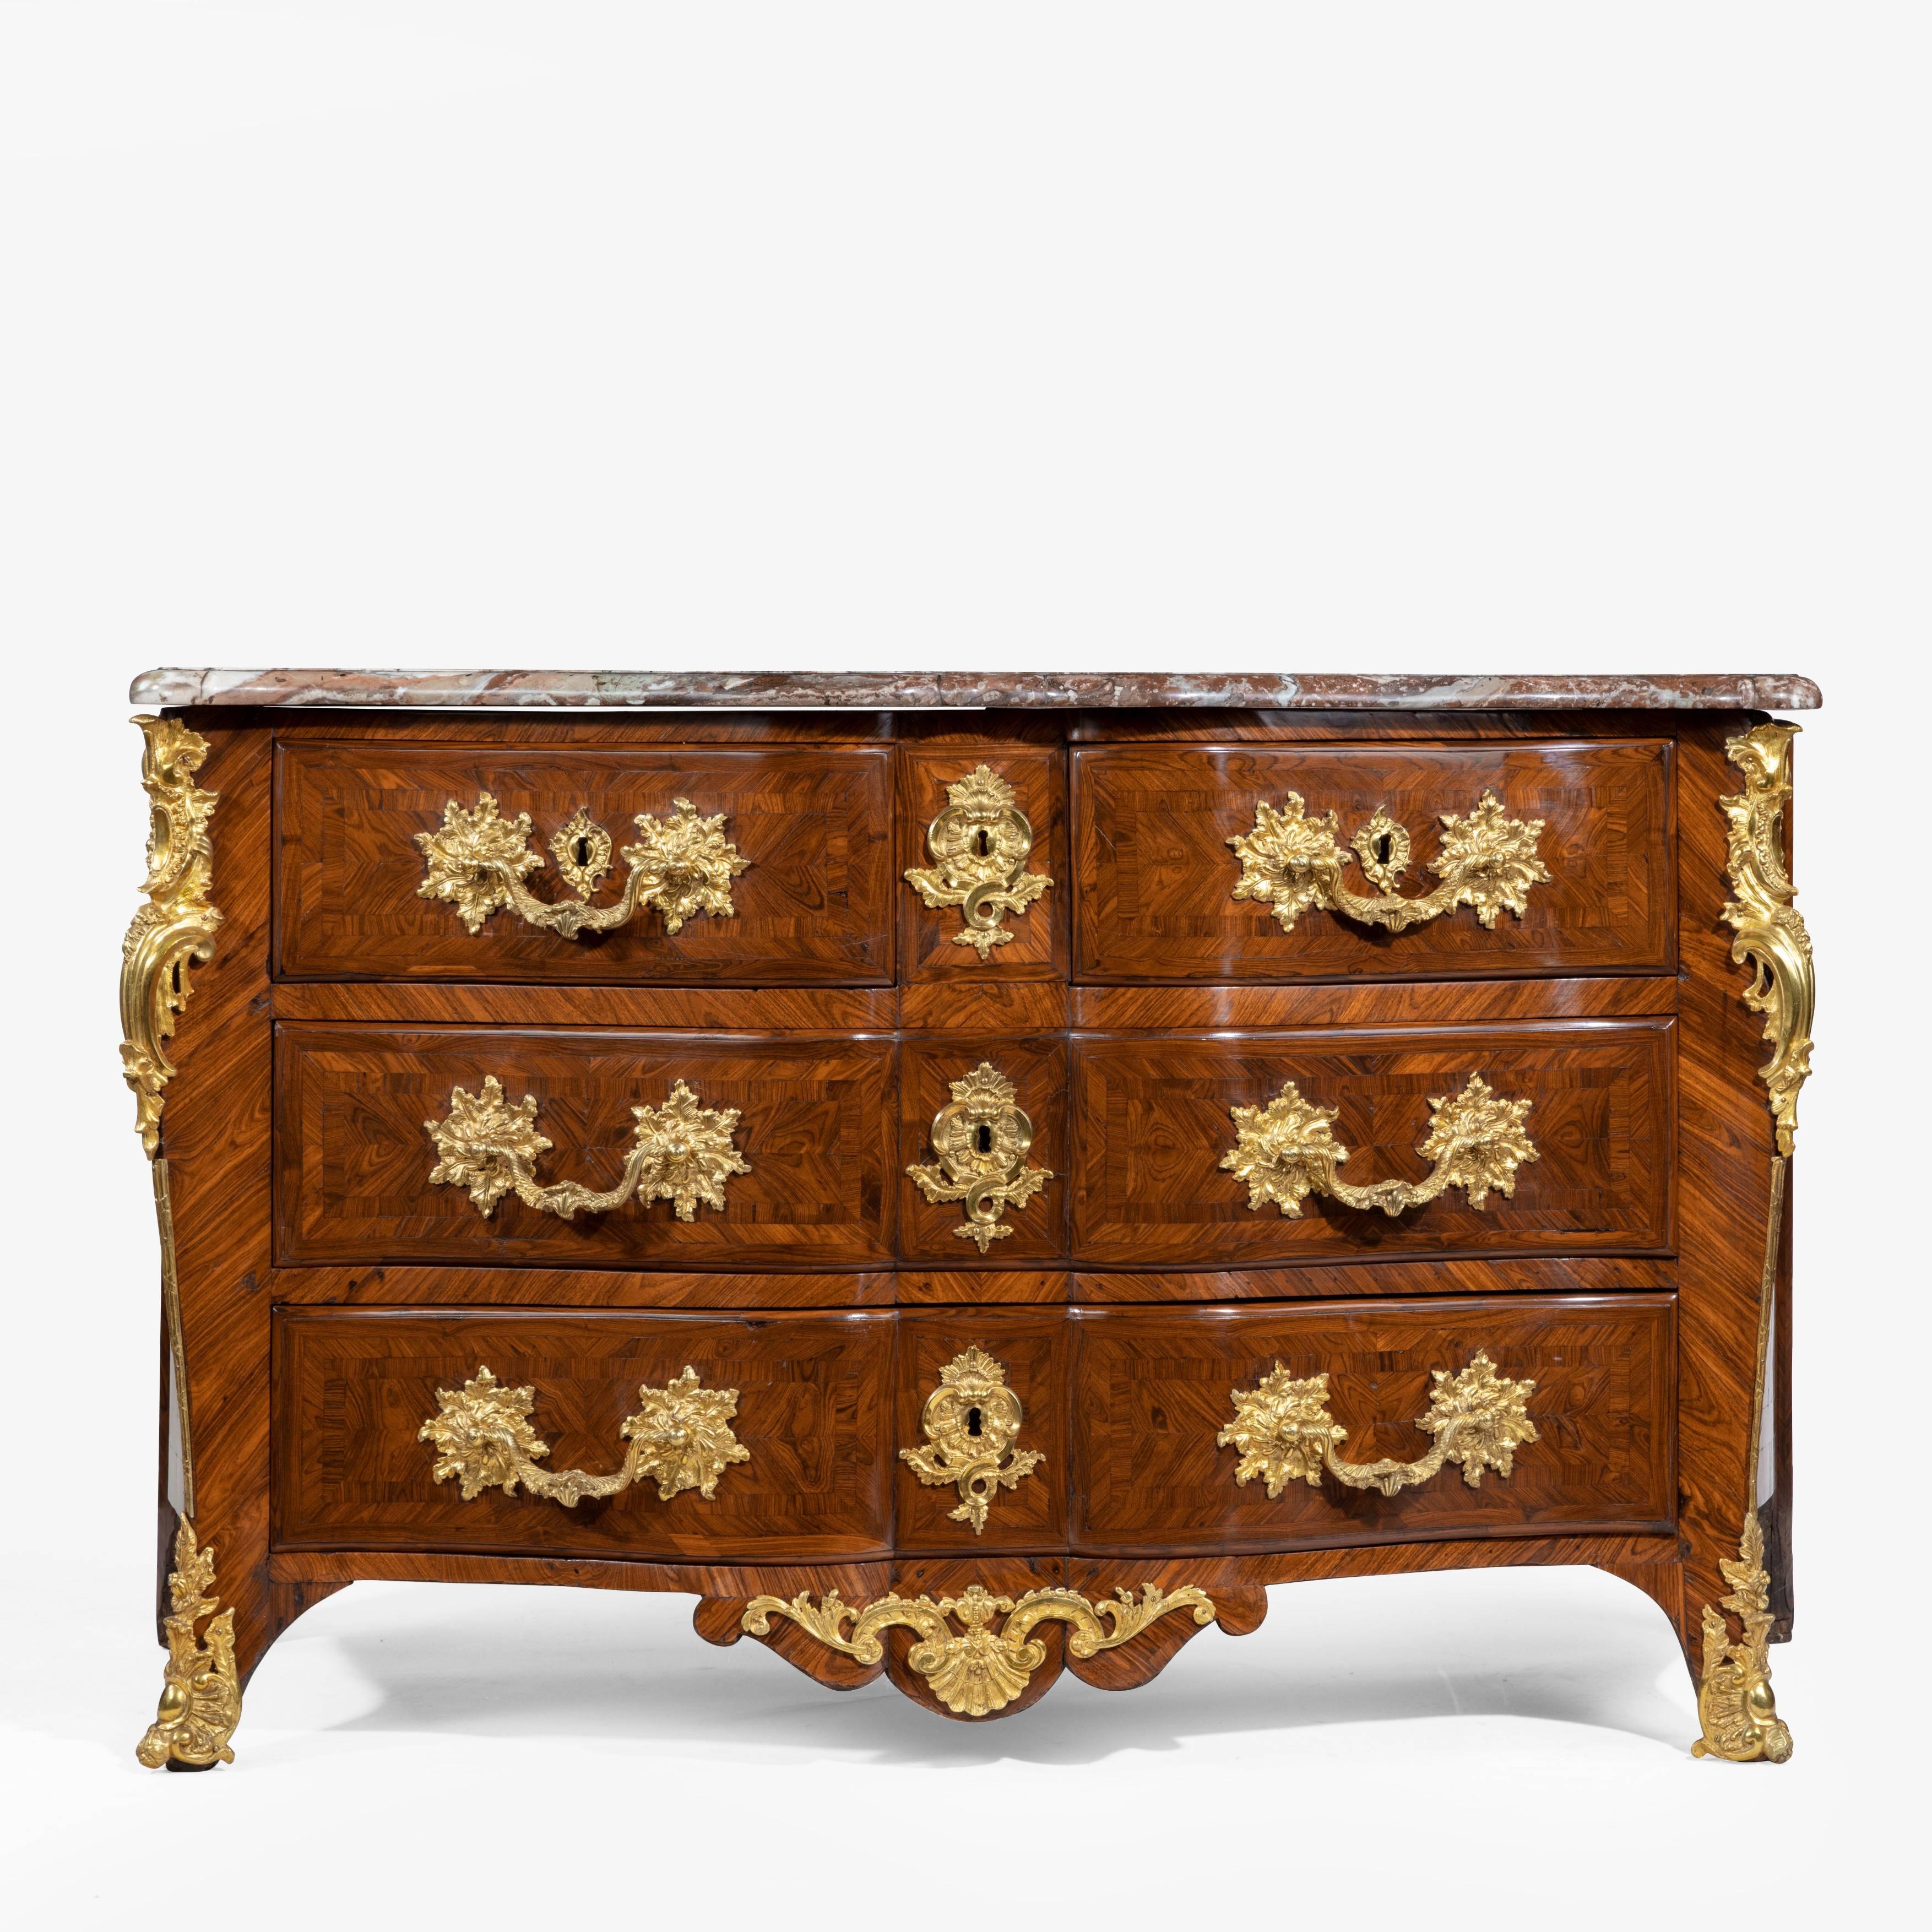 An imposing kingwood commode by de Jeune, the original rouge marble top set upon the shaped base with three wide serpentine drawers, decorated throughout with crossbanding and chevron, herring-bone and quarter-veneers, richly applied with